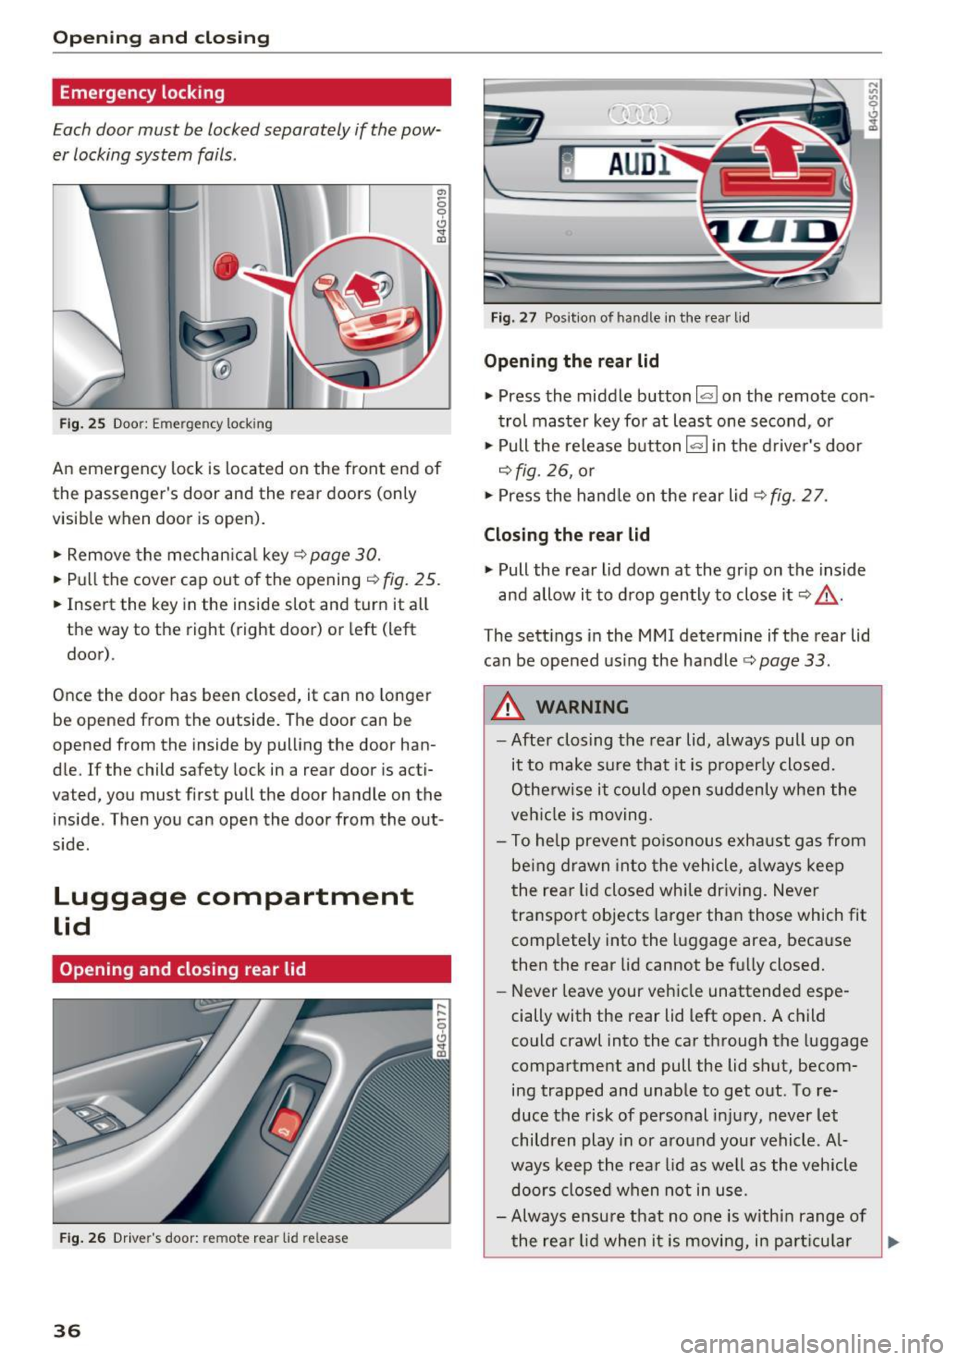 AUDI S6 2016  Owners Manual Opening  and clo sin g 
Emergency  locking 
Each door  must  be locked separately  if  the pow­
er locking  system  fails. 
Fig . 25 Door: Emergency  lock ing 
.,, 
0 9 Cl <t m 
An emergency  lock  i